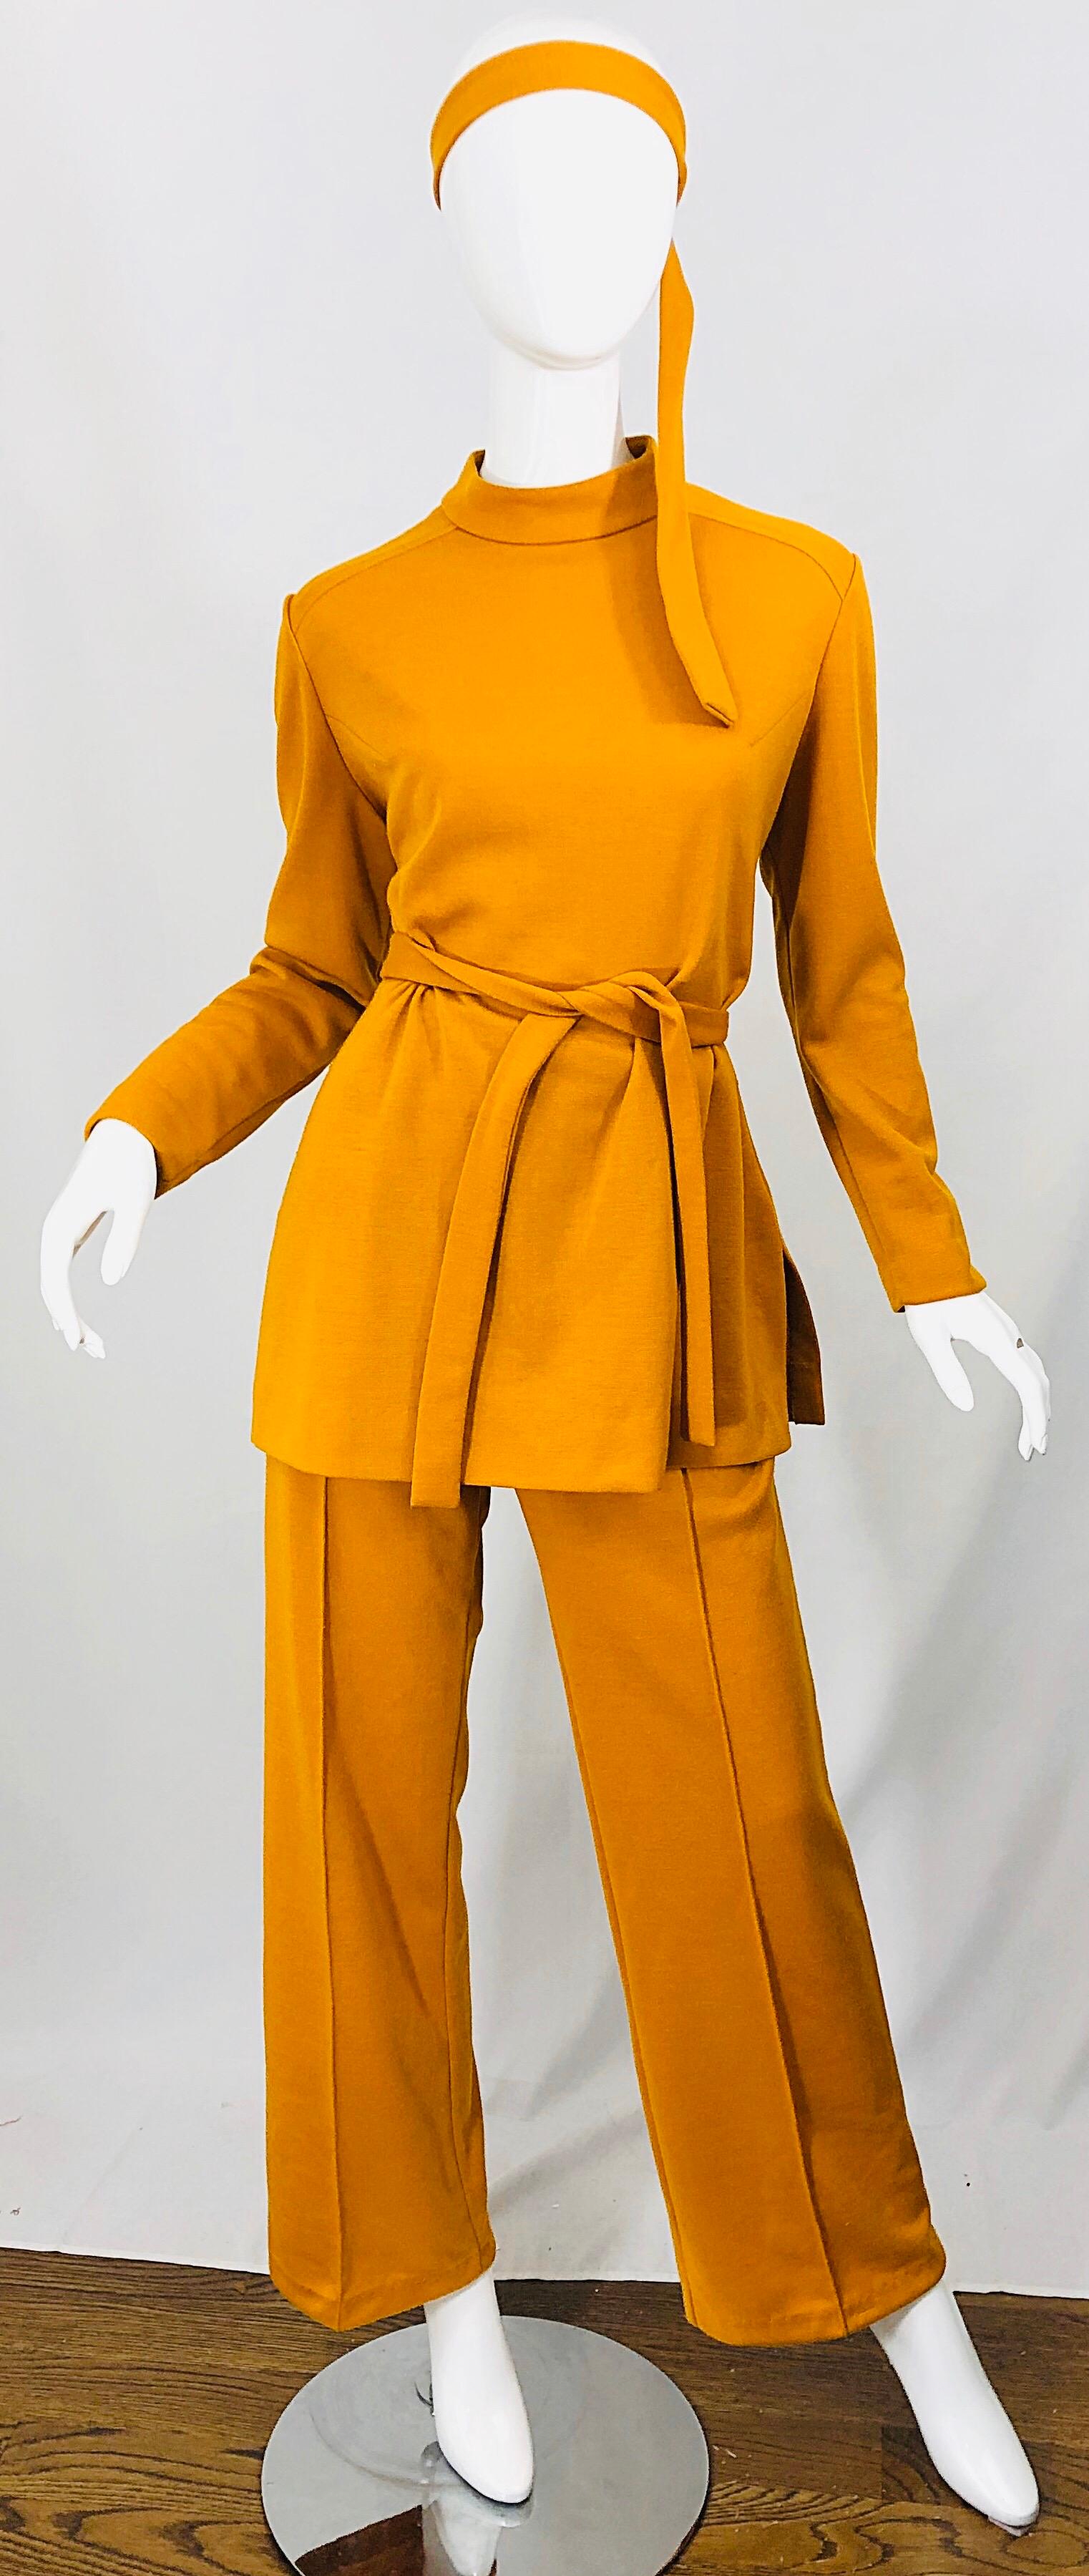 1970s Marigold Mustard Yellow Four Piece Vintage 70s Knit Shirt + Pants + Belt In Excellent Condition For Sale In San Diego, CA